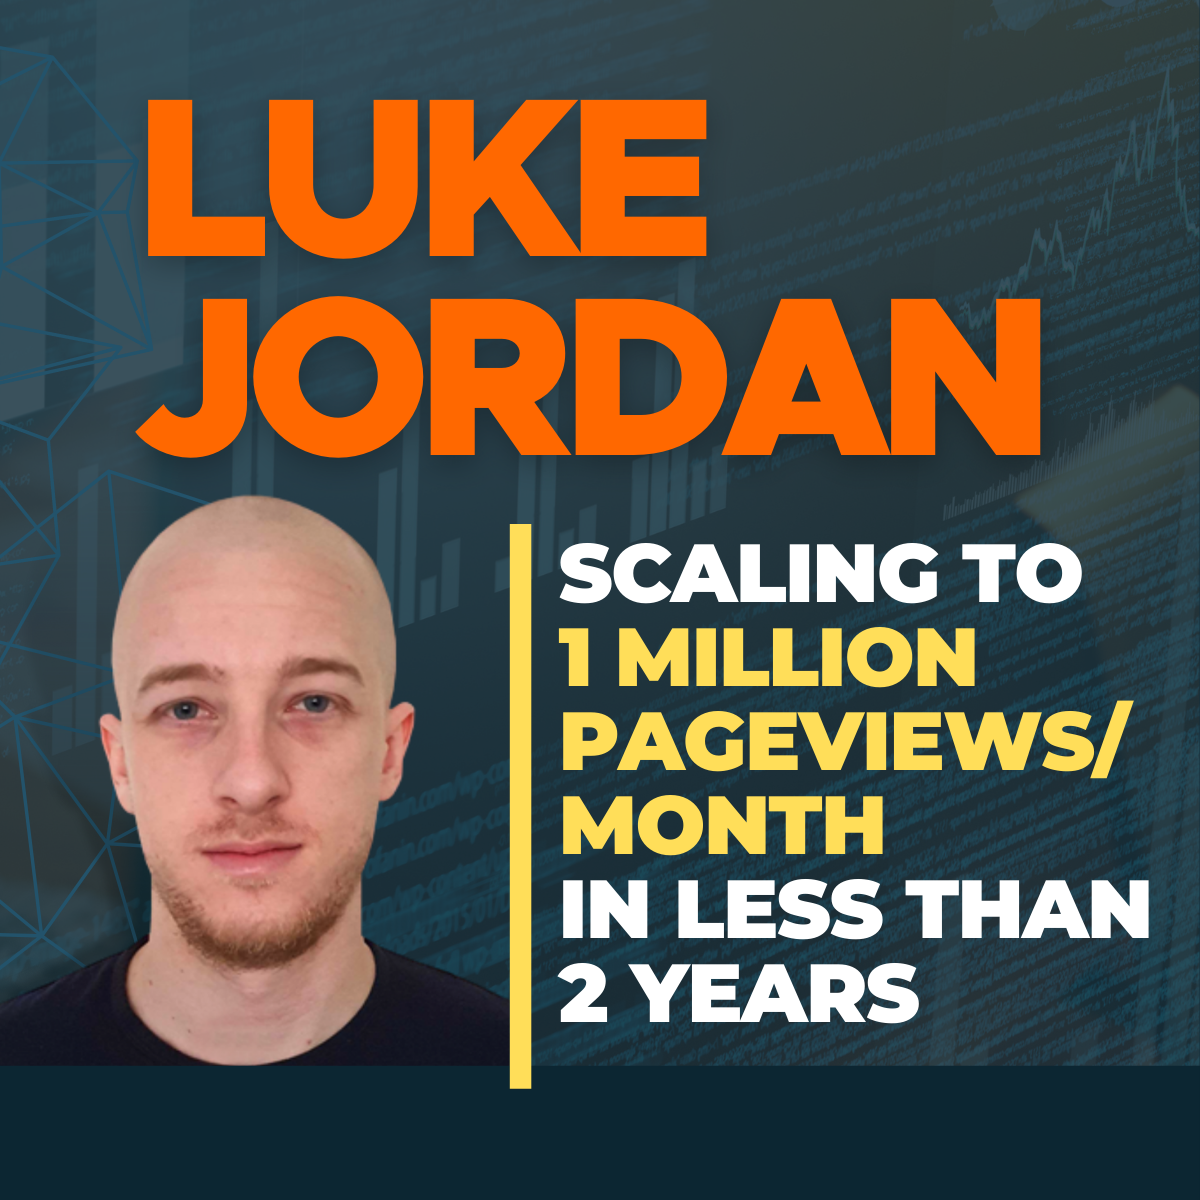 Luke Jordan on scaling to 1 million pageviews/month in less than 2 years